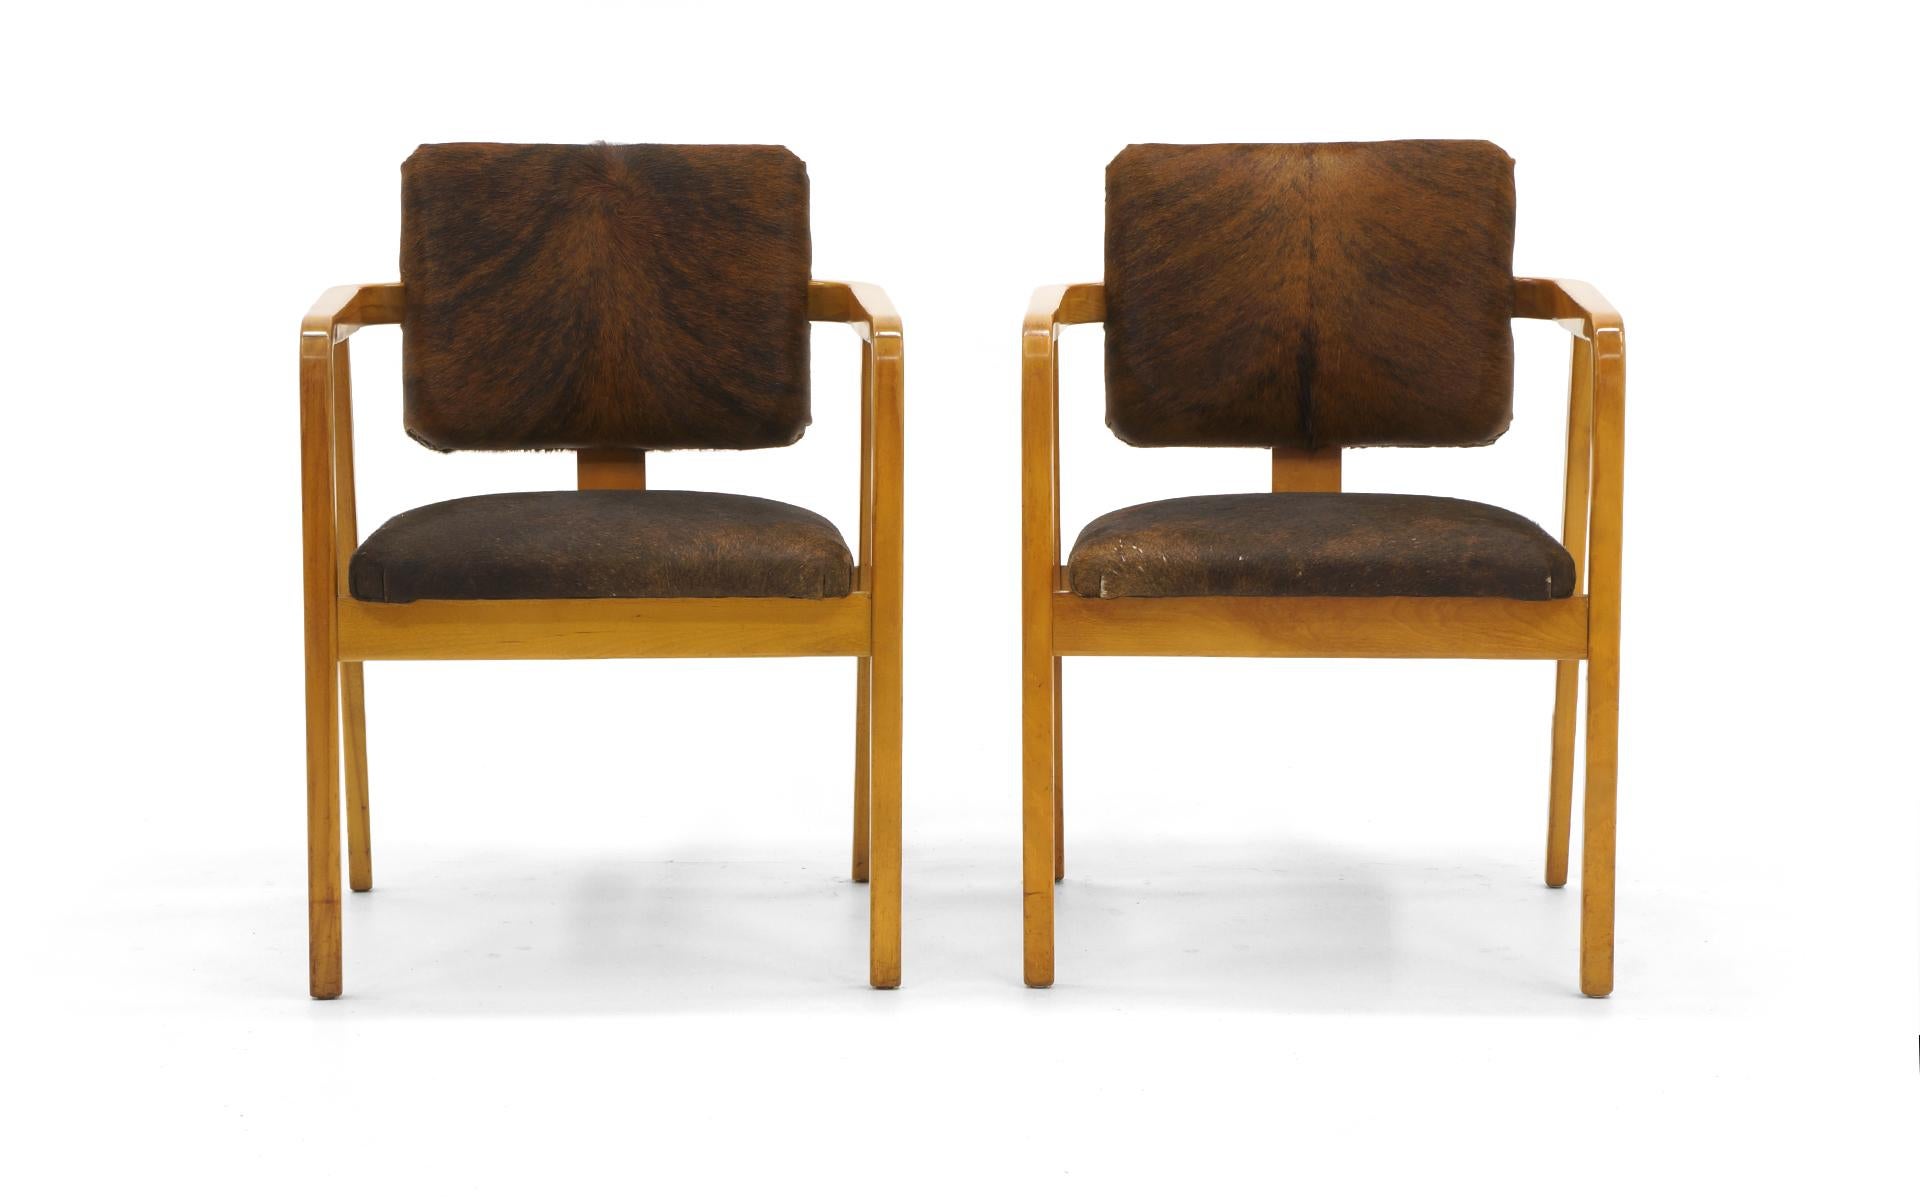 Pair of George Nelson for Herman Miller armchairs with new cowhide upholstery. Great for any modern environment besides the obvious modern cabin or rustic setting.